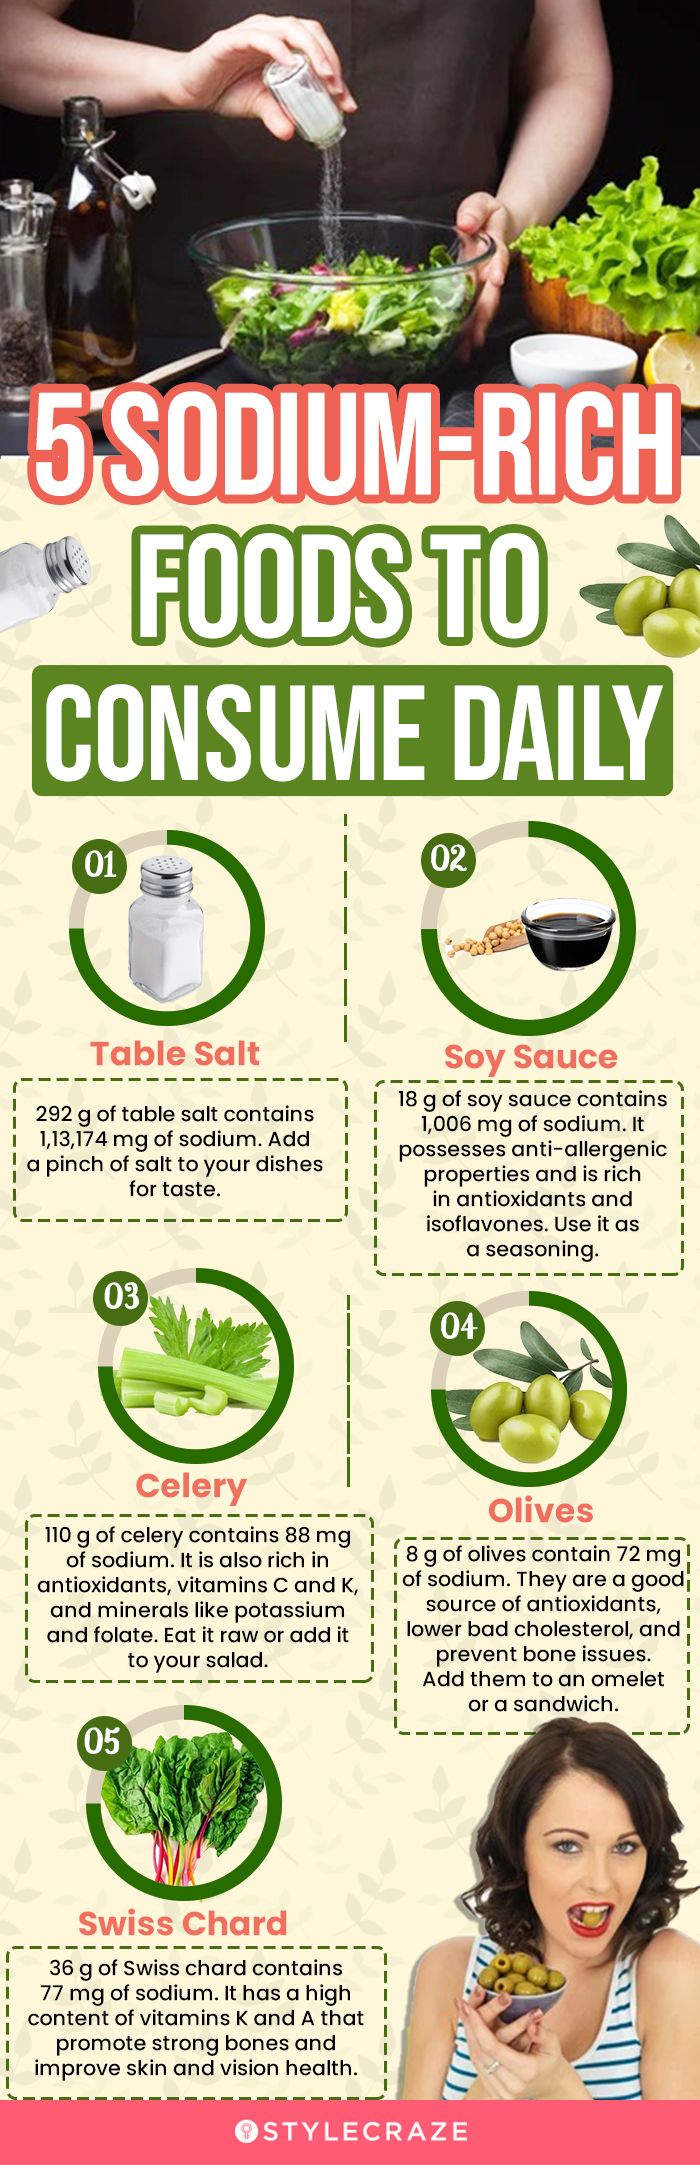 5 sodium rich foods to consume daily (infographic)